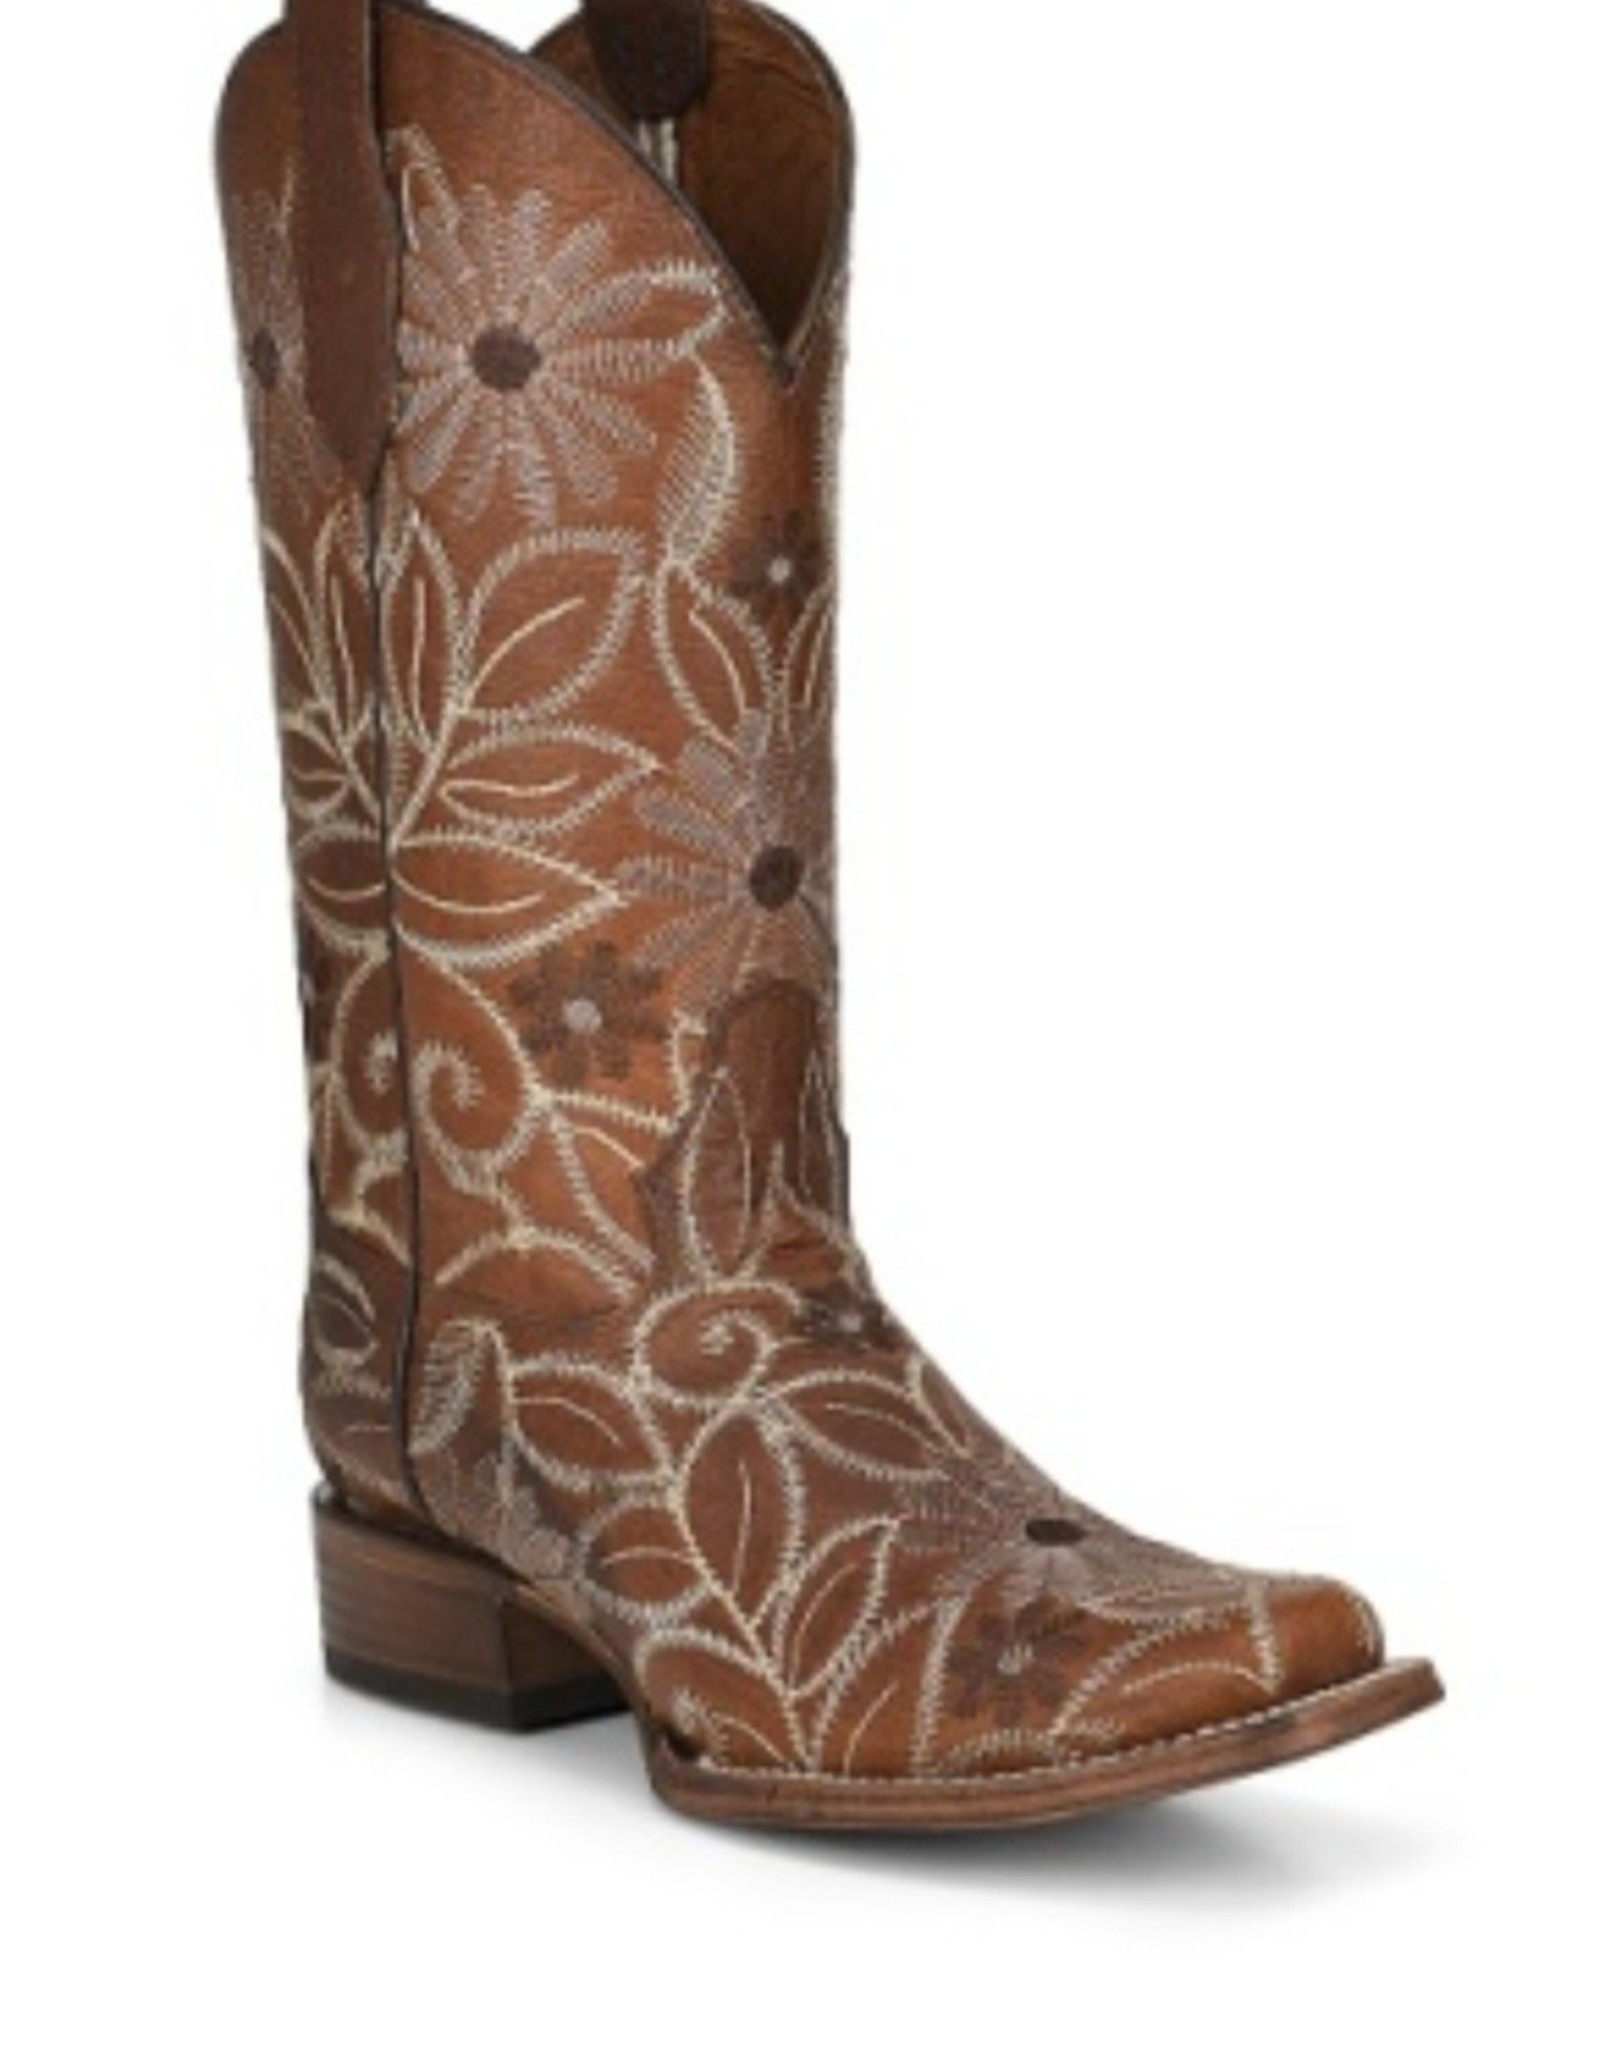 Ladies Circle G Saddle Tan Floral Embroidered Western Cowboy Boot